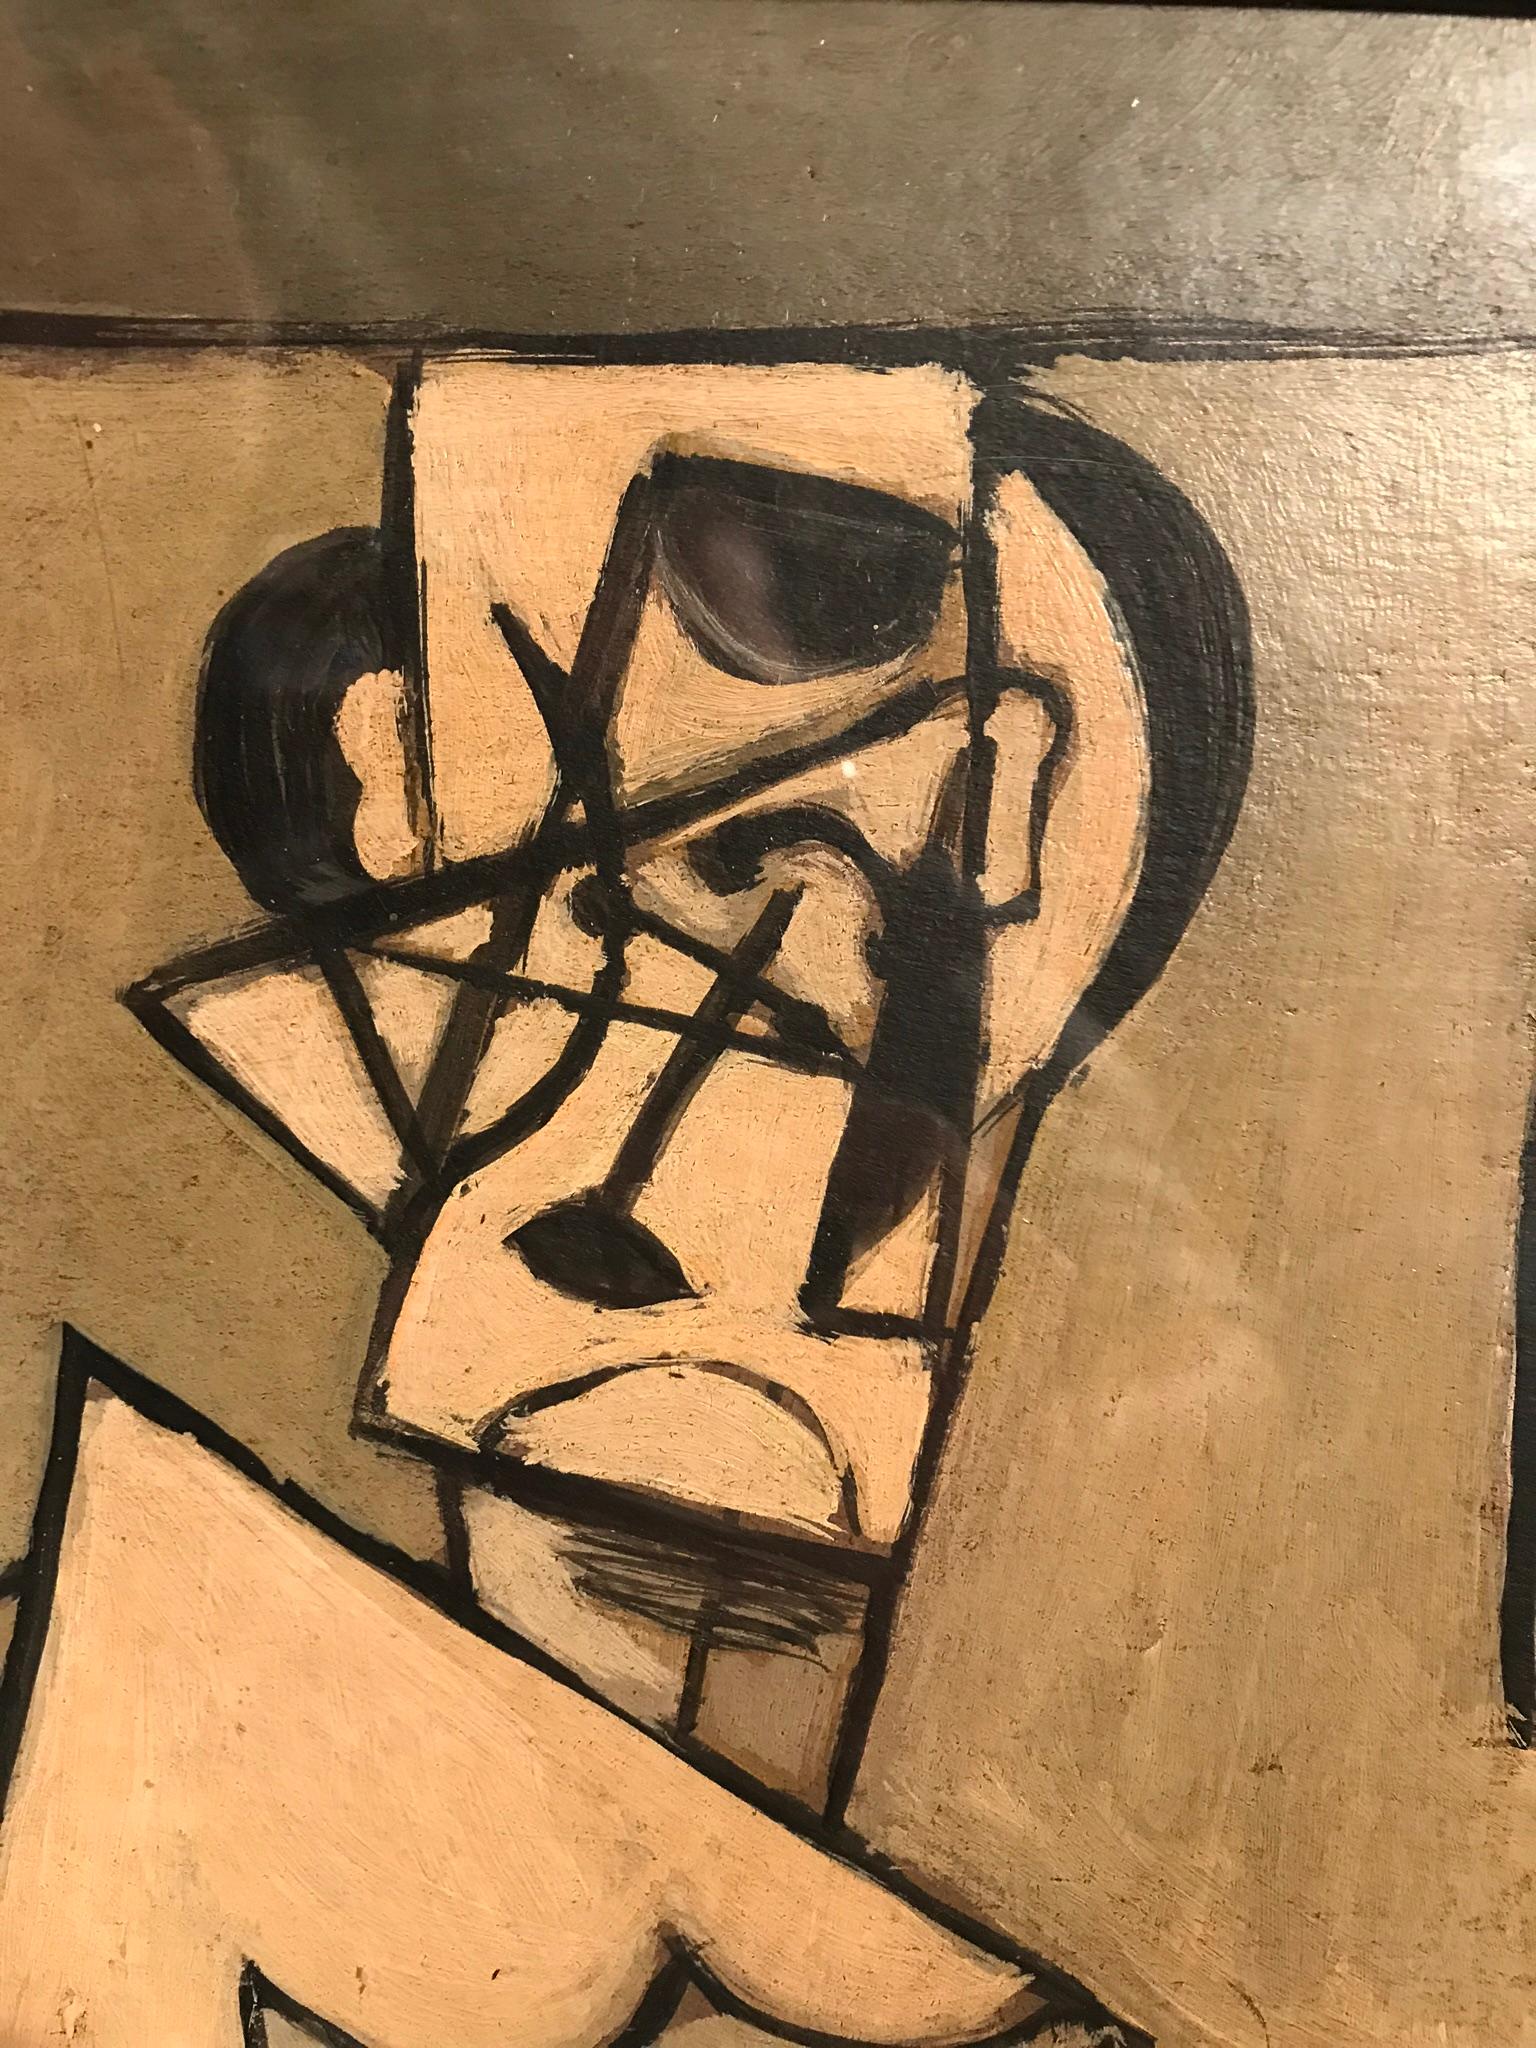 Describing how the artist sees themselves with each line, shape and bush stroke of this cubist oil painting, this piece is a reflection of the creator. Signed J.G.